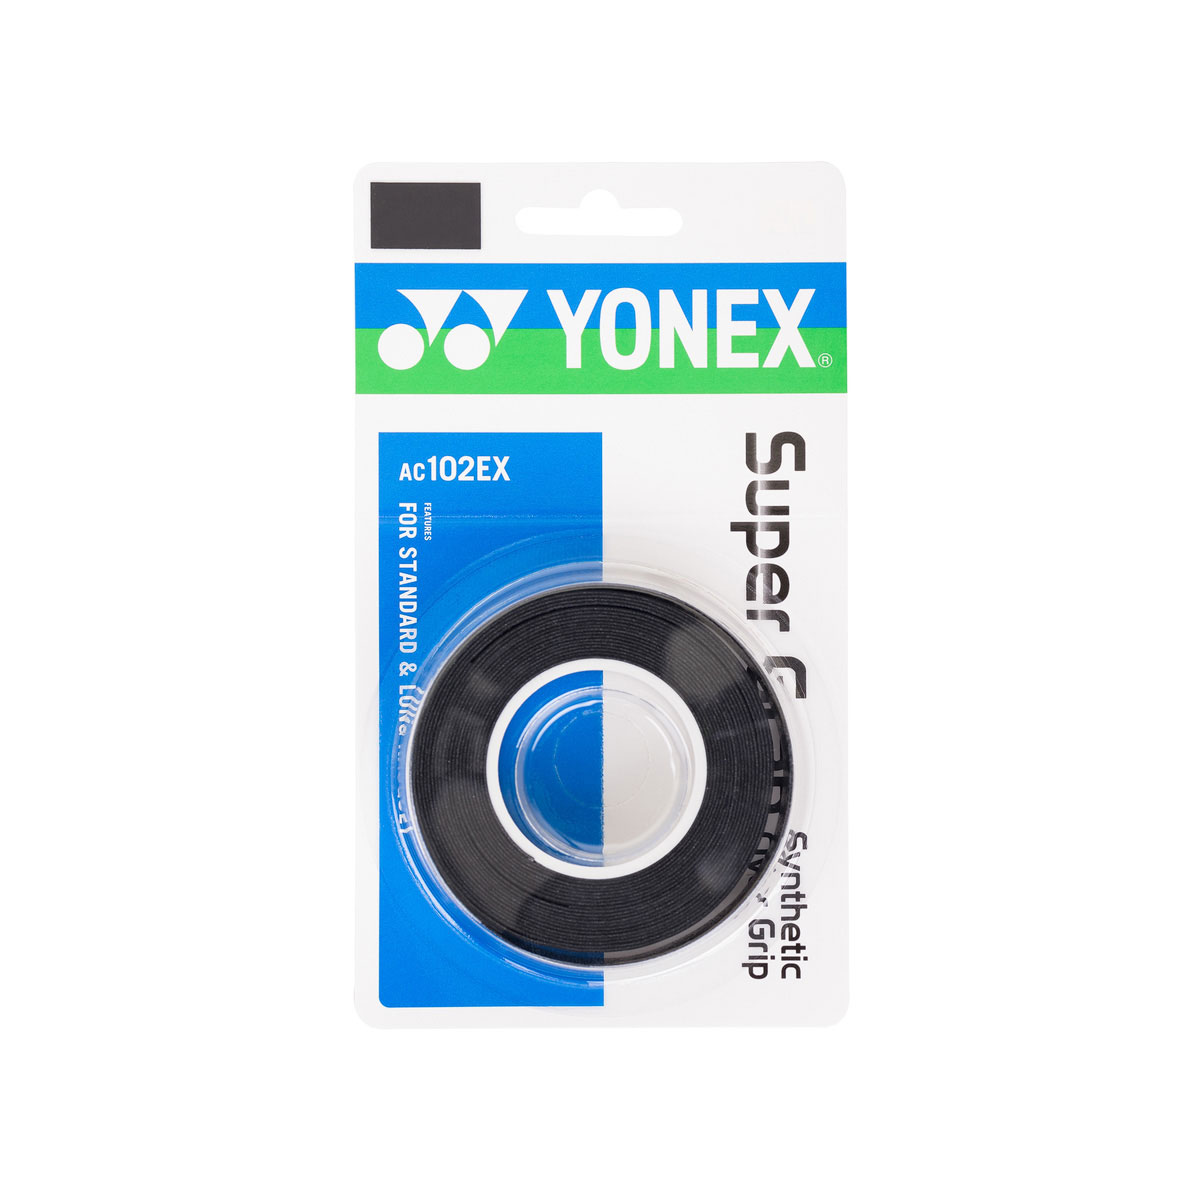 YONEX Super Grap Synthetic Over Grip 3 Stk. - French Pink